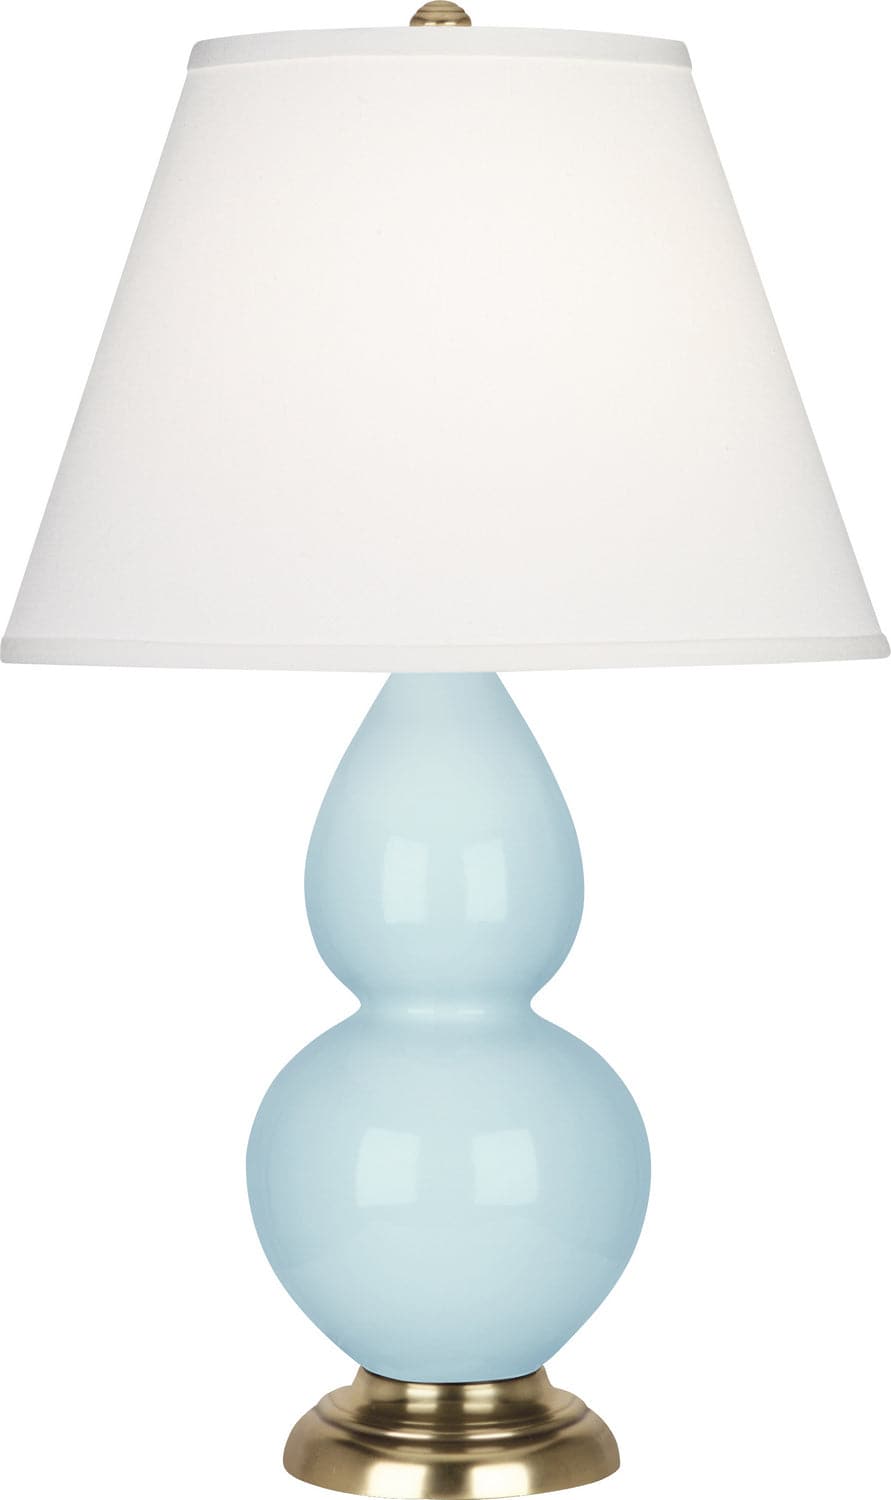 Robert Abbey - 1689X - One Light Accent Lamp - Small Double Gourd - Baby Blue Glazed w/Antique Natural Brass